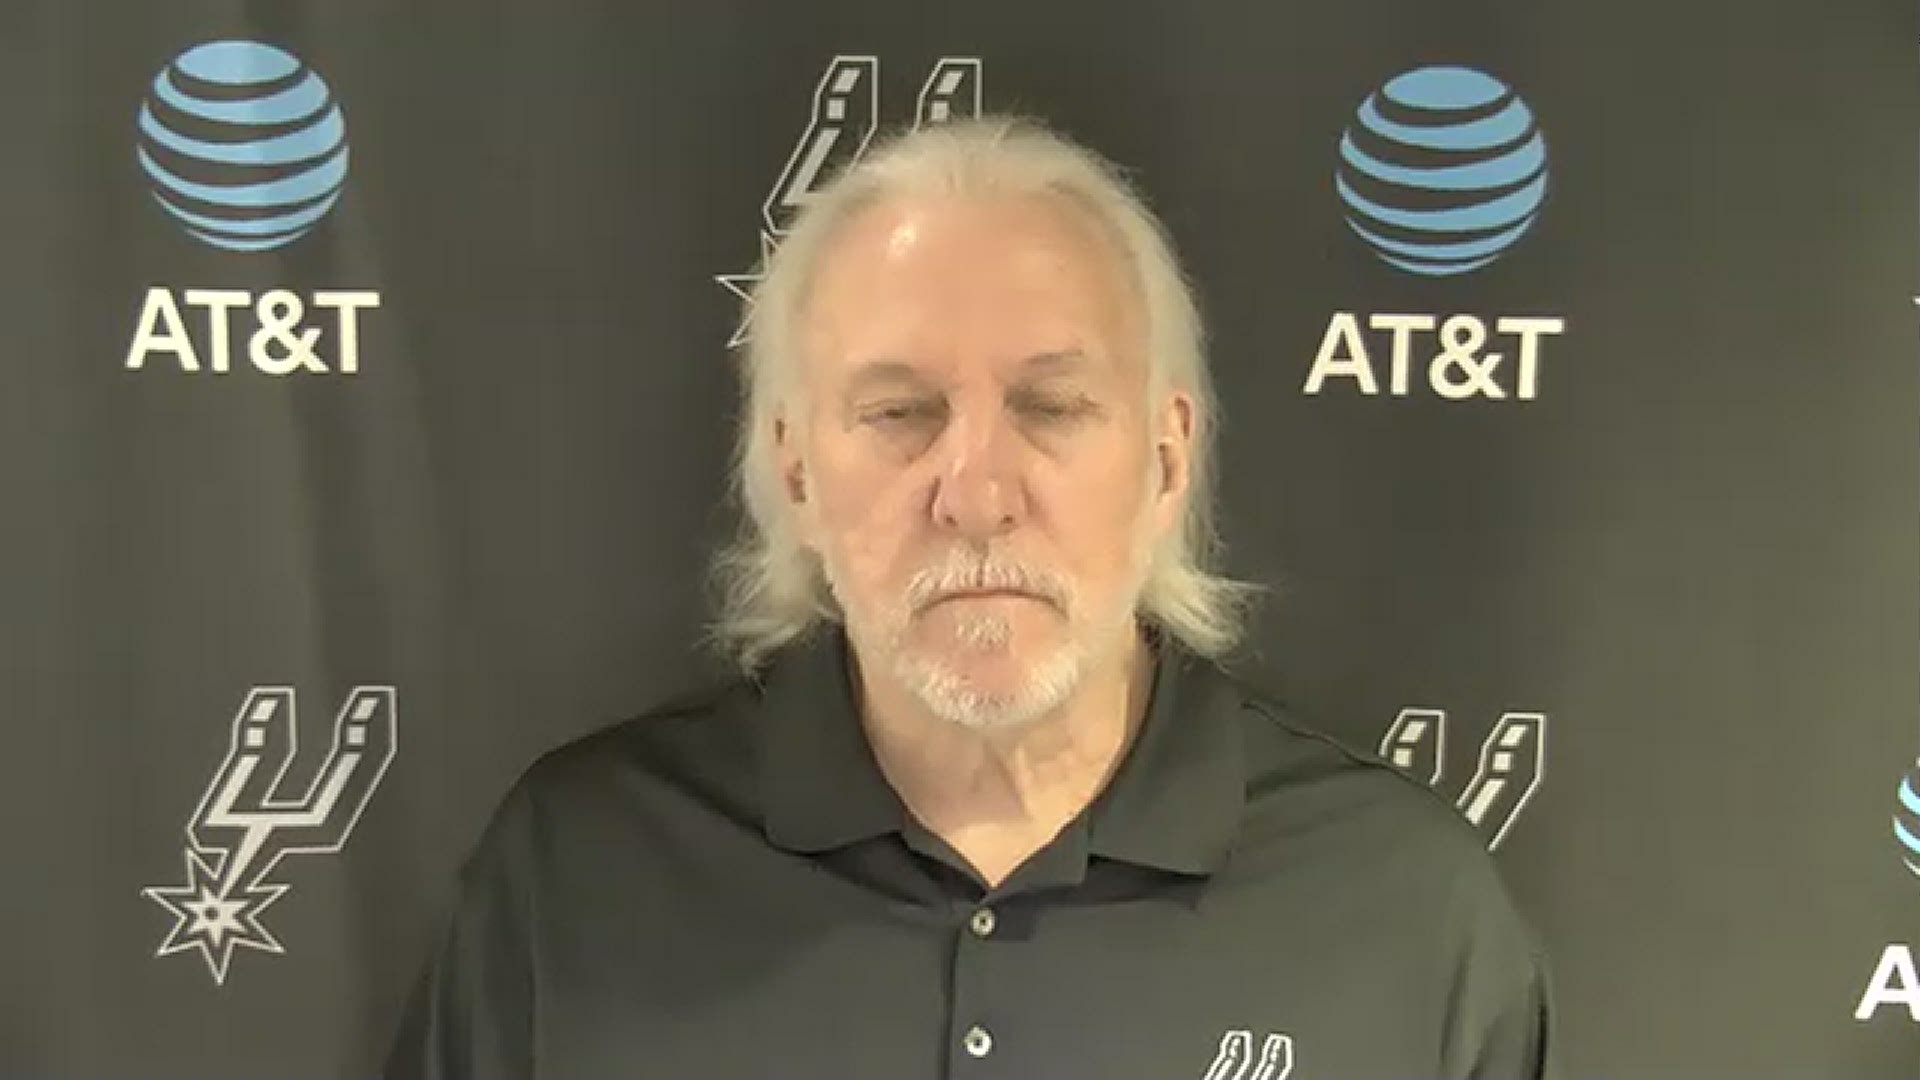 Popovich called out Texas Gov. Greg Abbott, said he doesn't expect Derrick White back this year, and talked about Devin Vassell sliding in to the starting lineup.